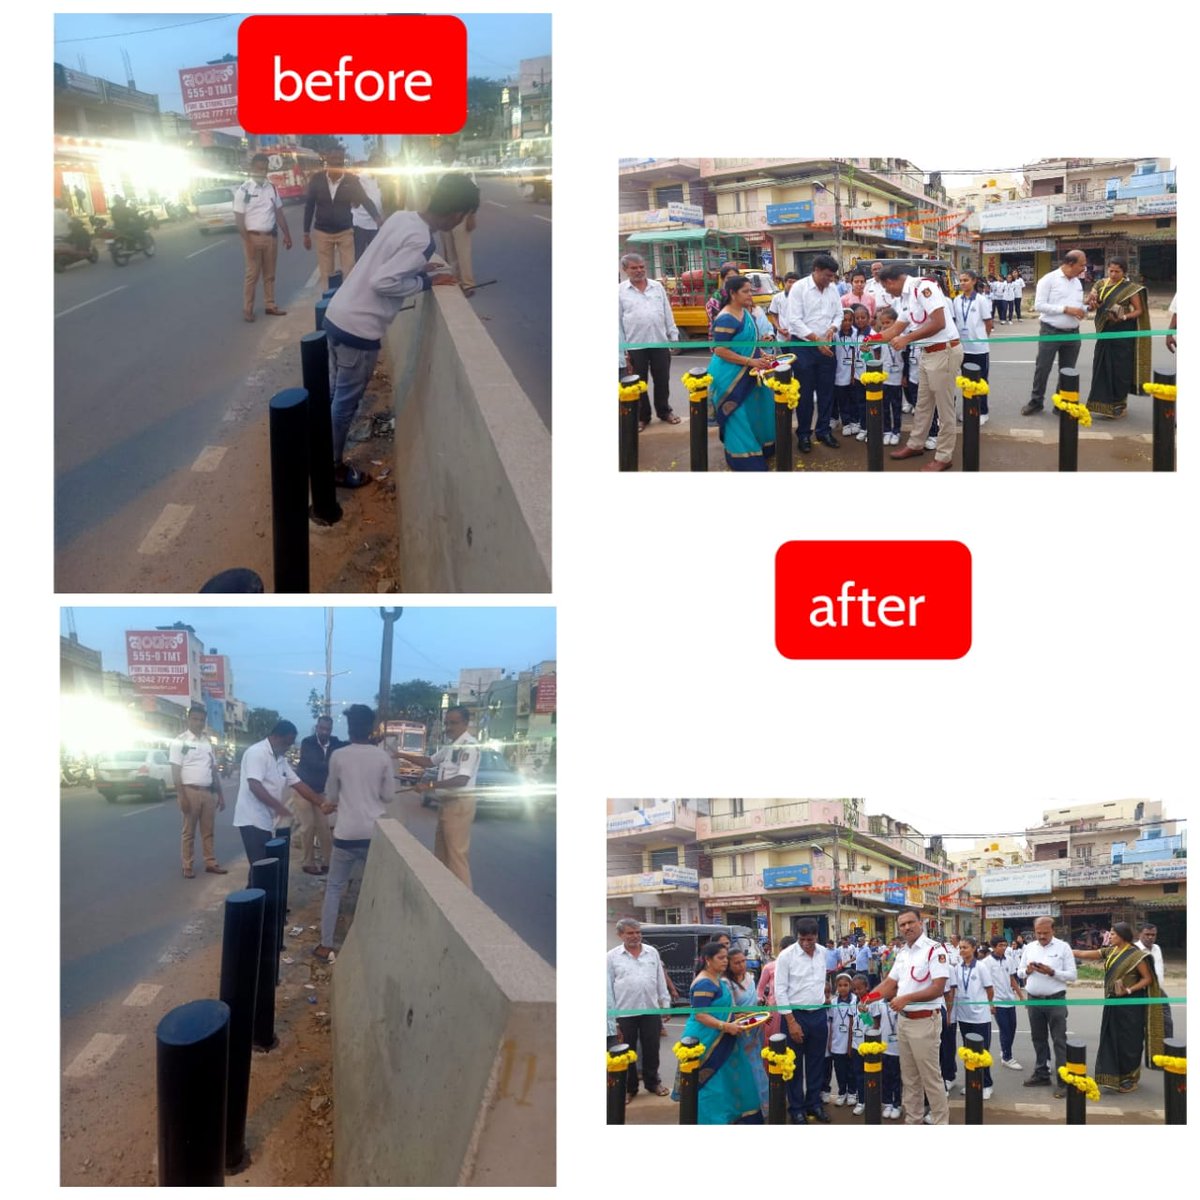 BTP work related to safe route to school. Opp vidhya shree school center median was closed for smooth traffic flow. On request medians removed bollards placed to ensure safety as well as smooth flow. @blrcitytraffic @DCPTrWestBCP